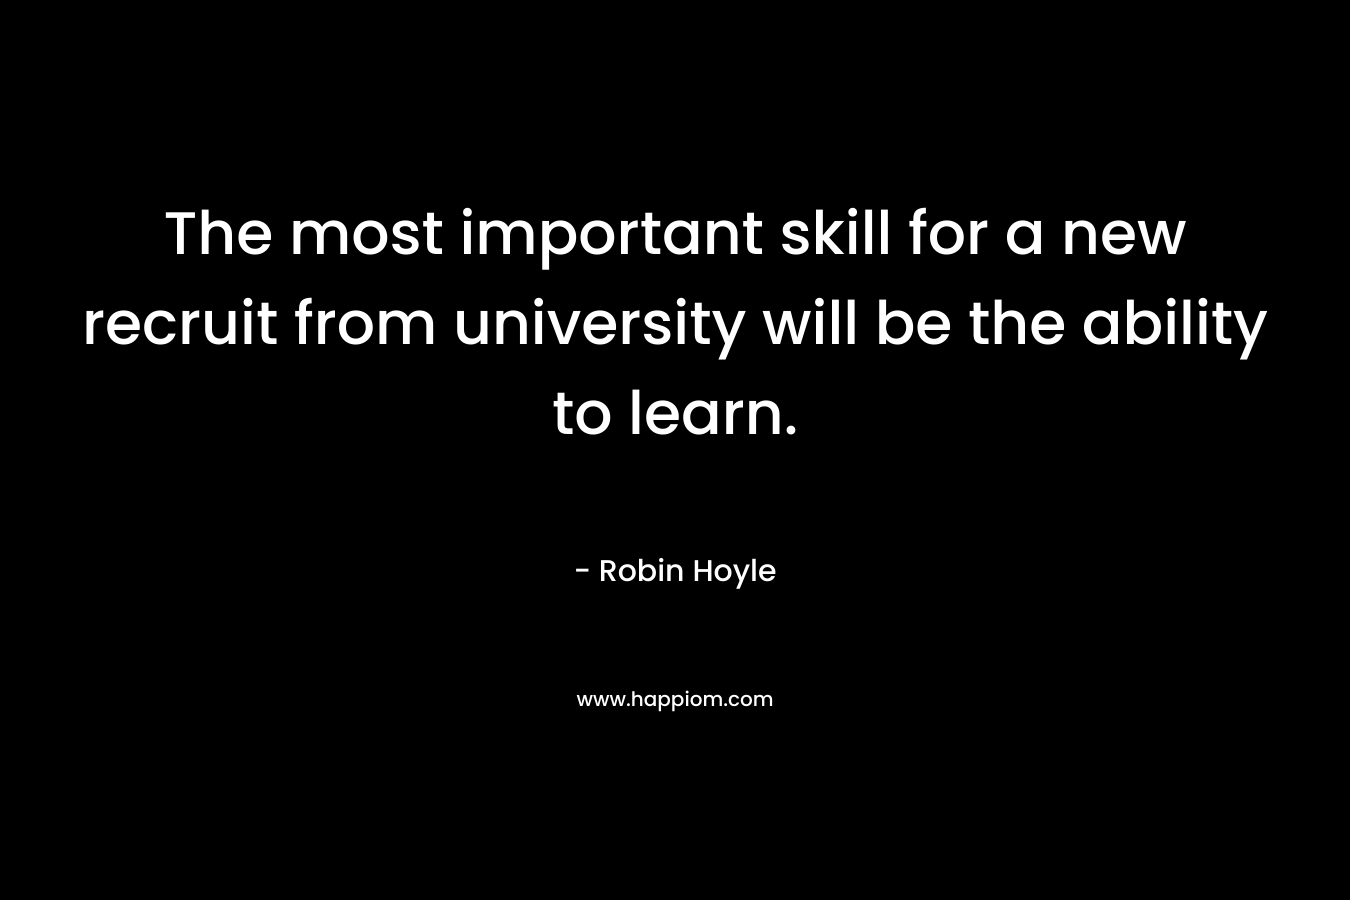 The most important skill for a new recruit from university will be the ability to learn. – Robin Hoyle